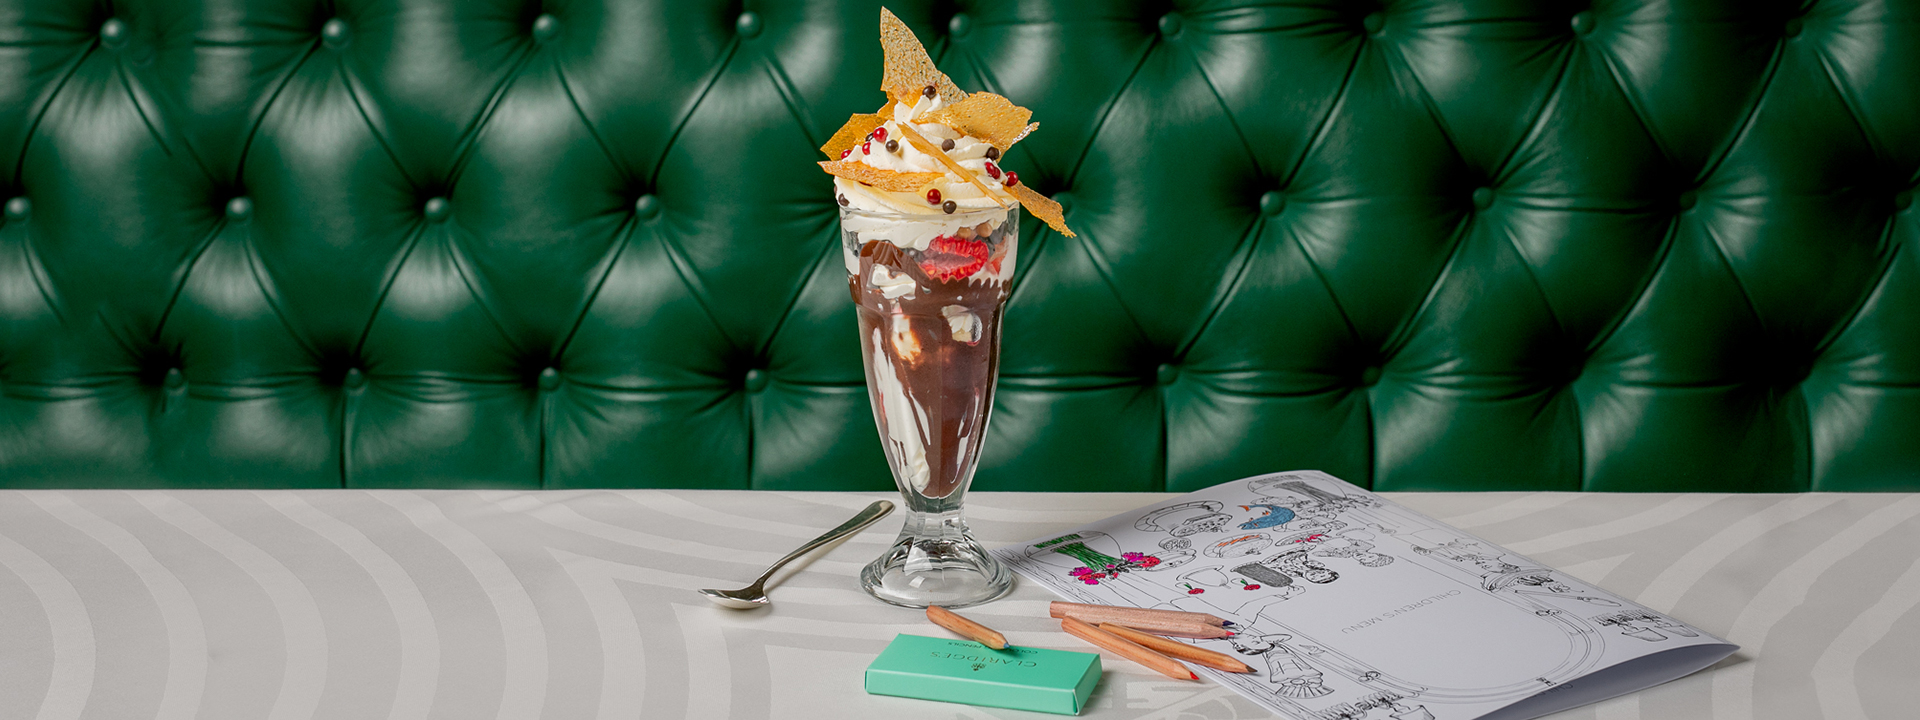 A colourful chocolate shake, from the children's menu, goes well with crayons and colouring books.